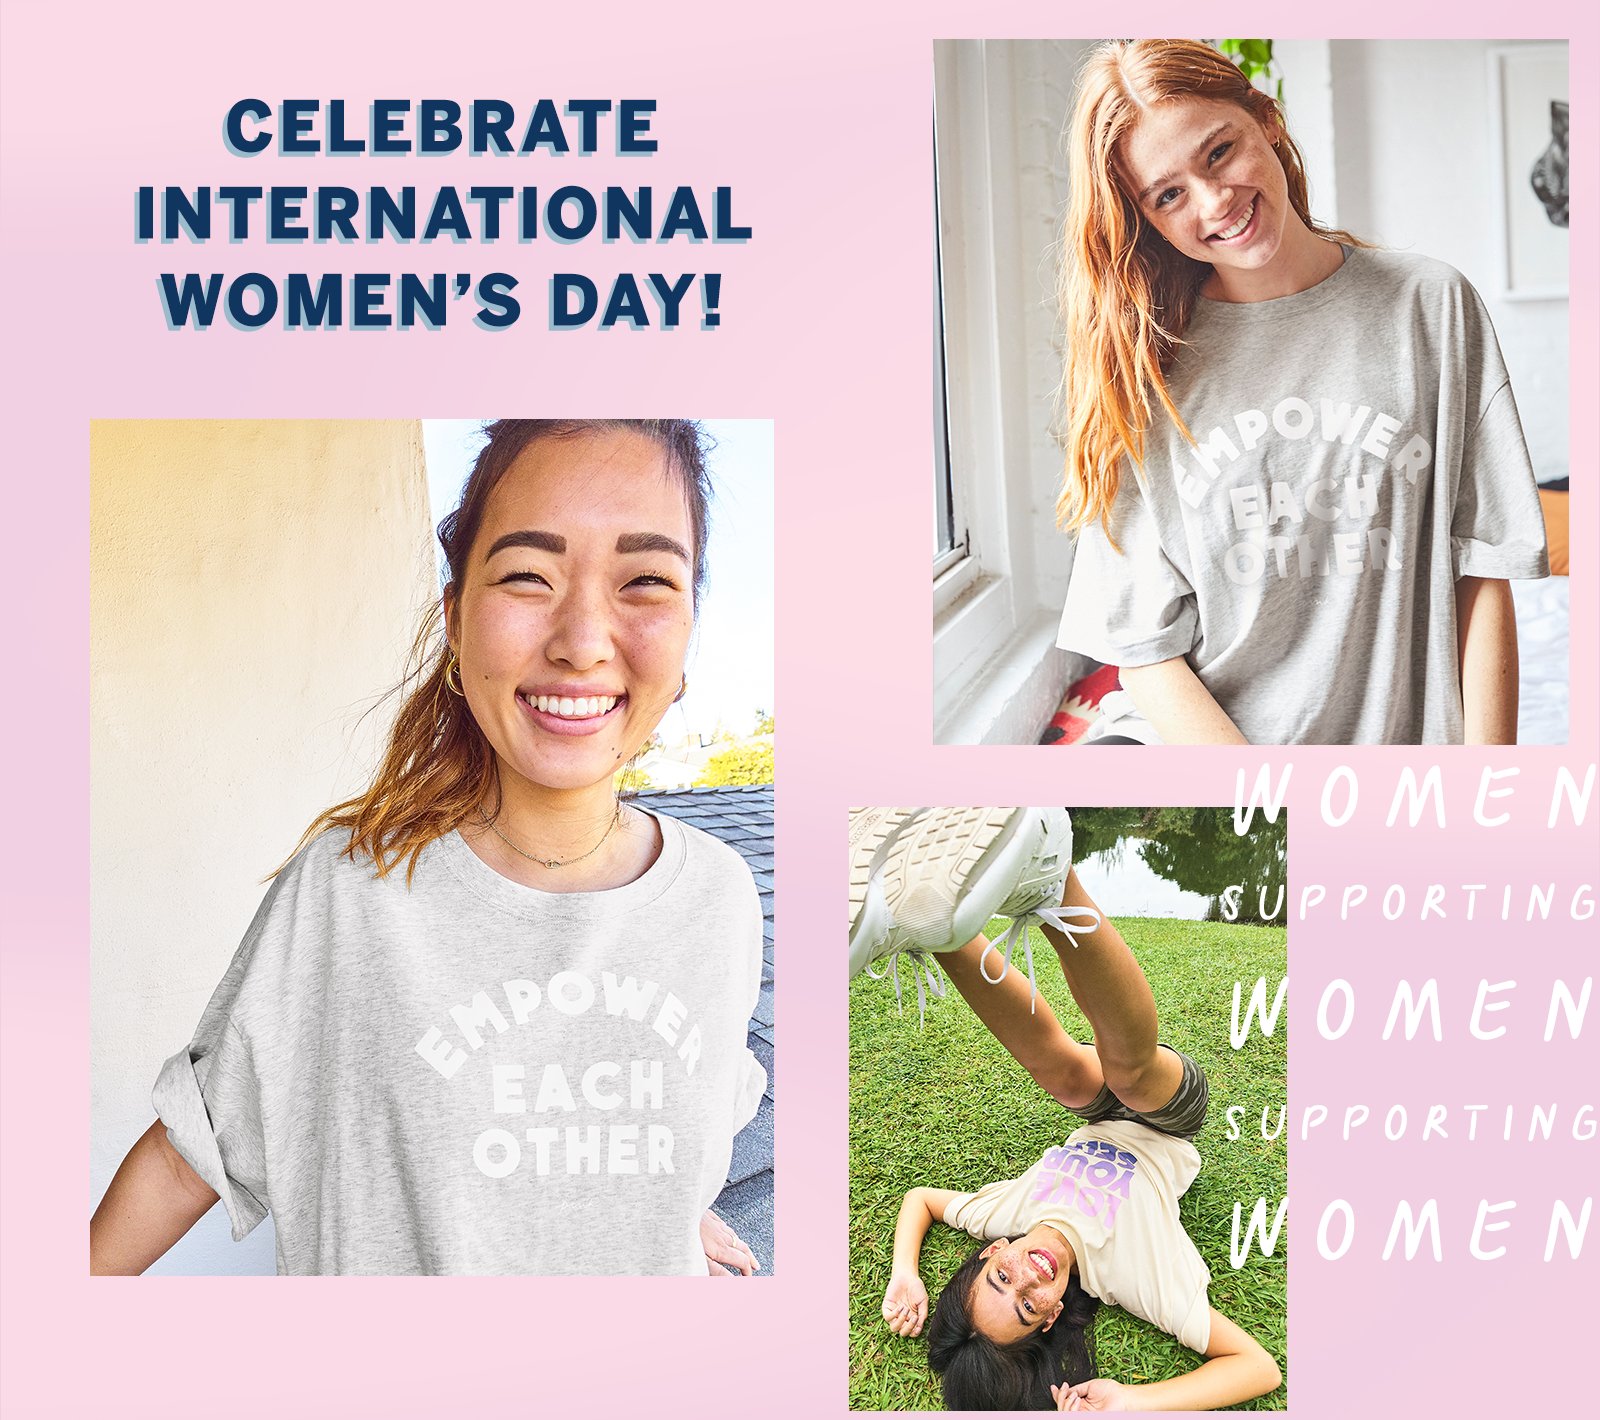 Celebrate International Womens Day! March 8th. Women Supporting Women. Women Supporting Women.